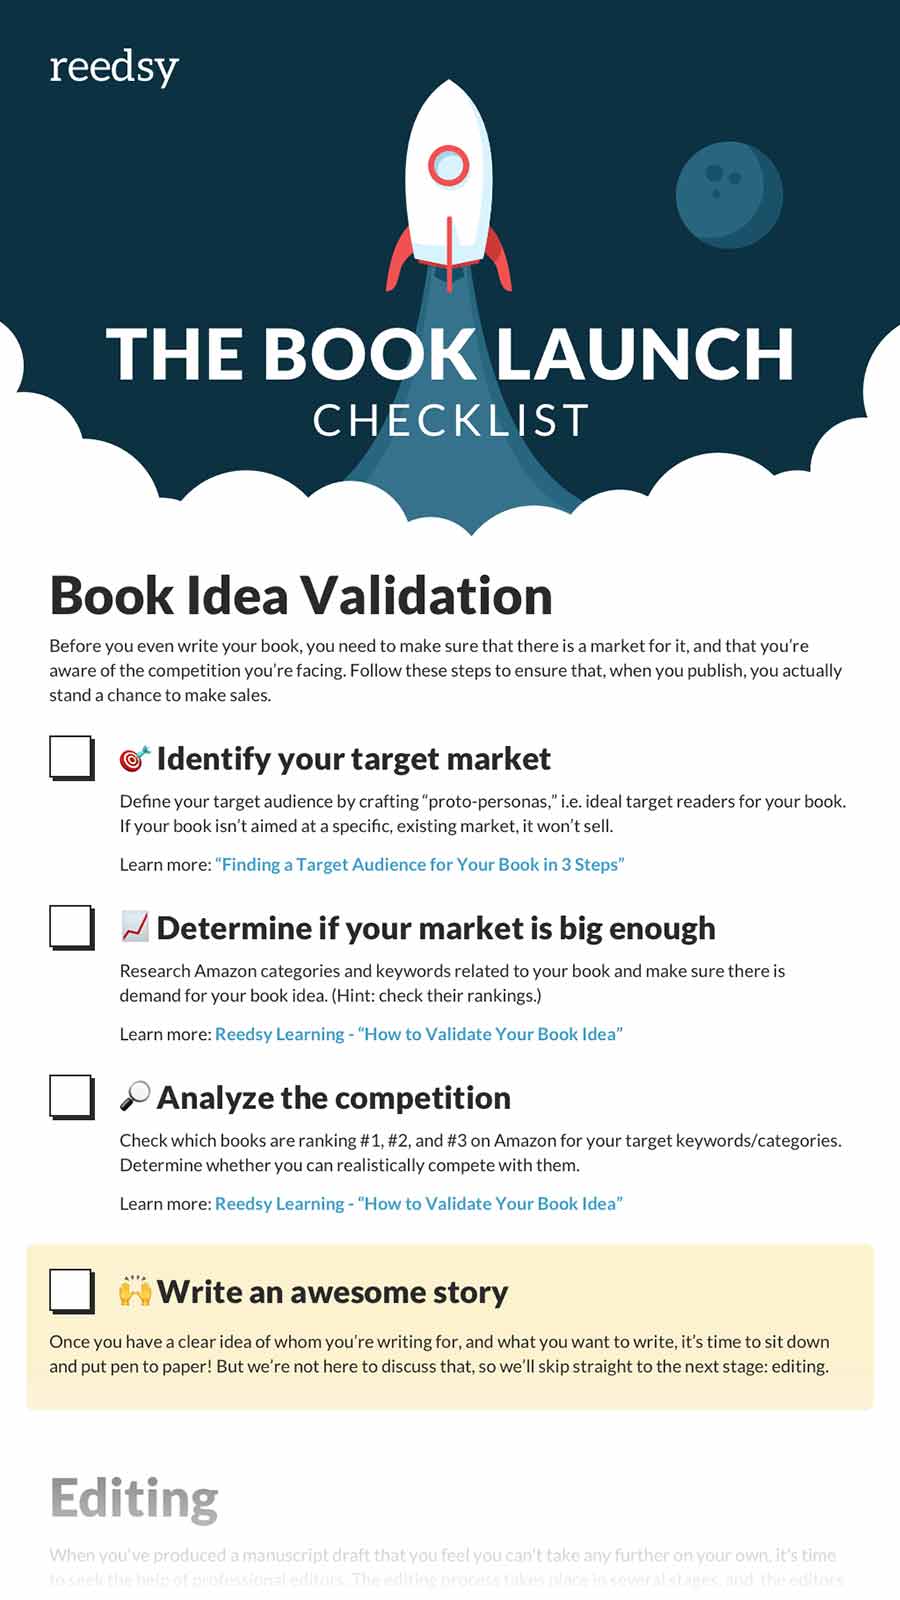 How to Plan a Successful Book Launch in 6 Easy Steps